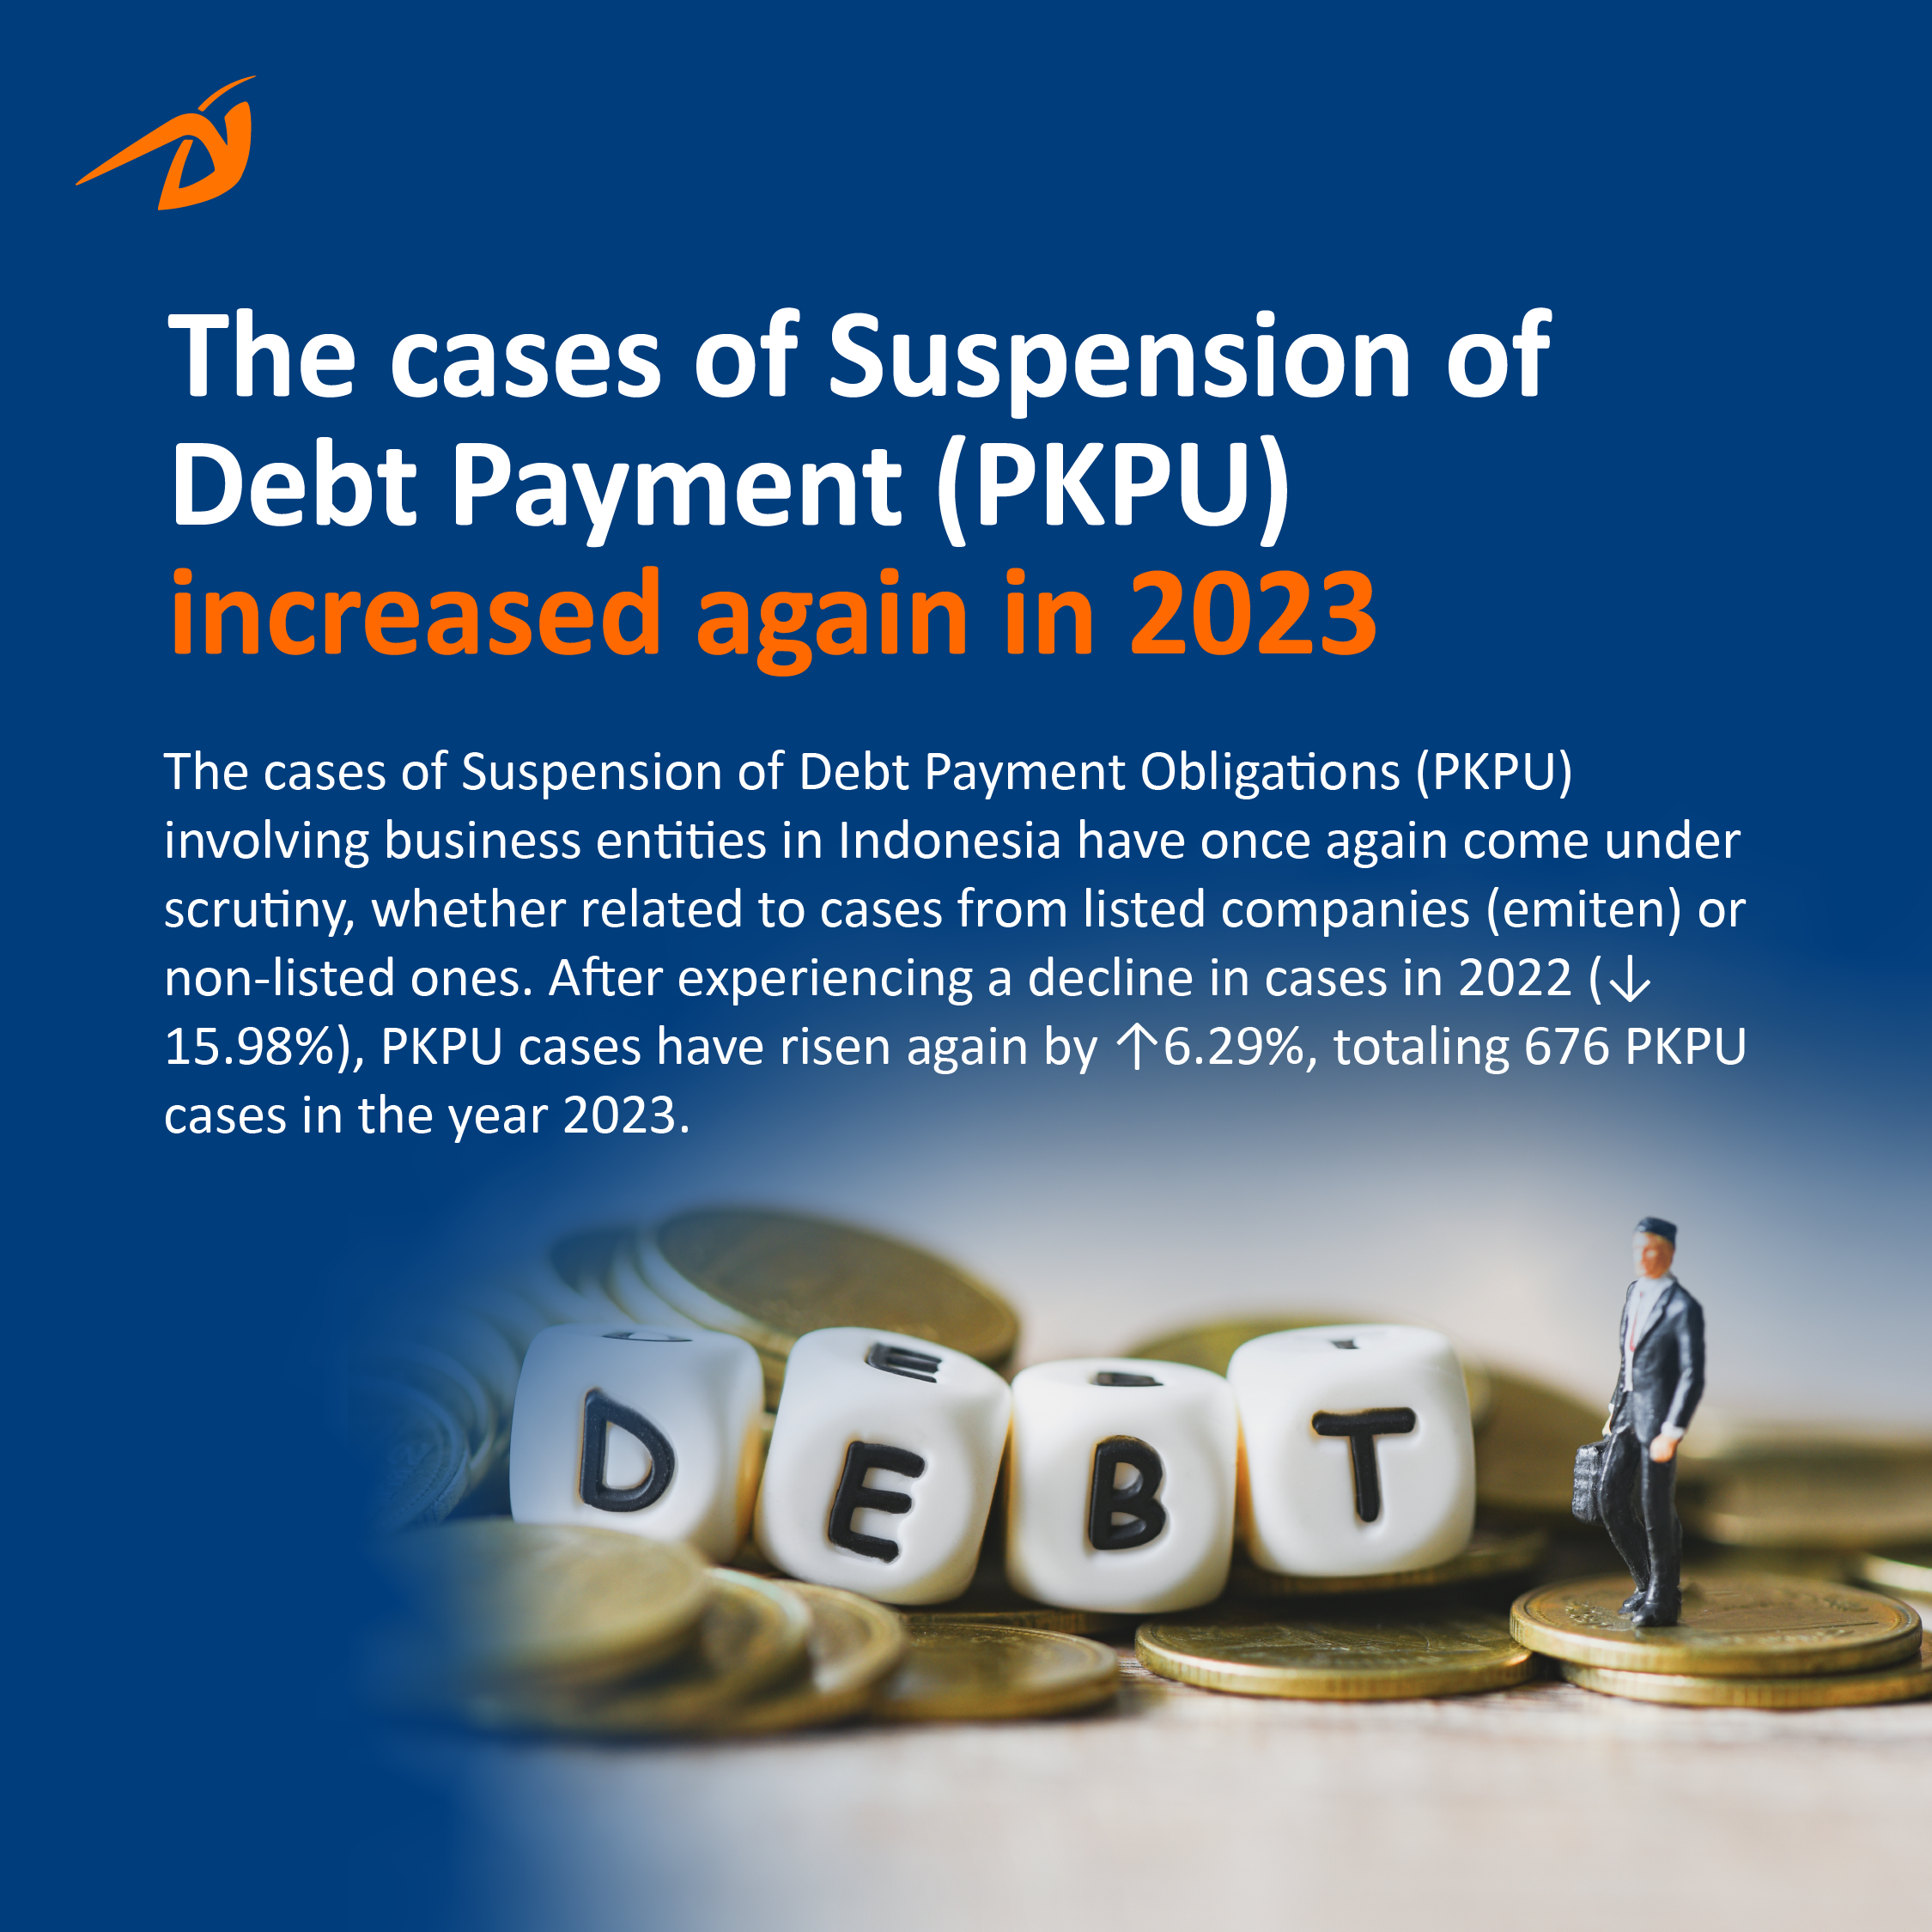 The cases of Suspension of Debt Payment (PKPU) increased again in 2023